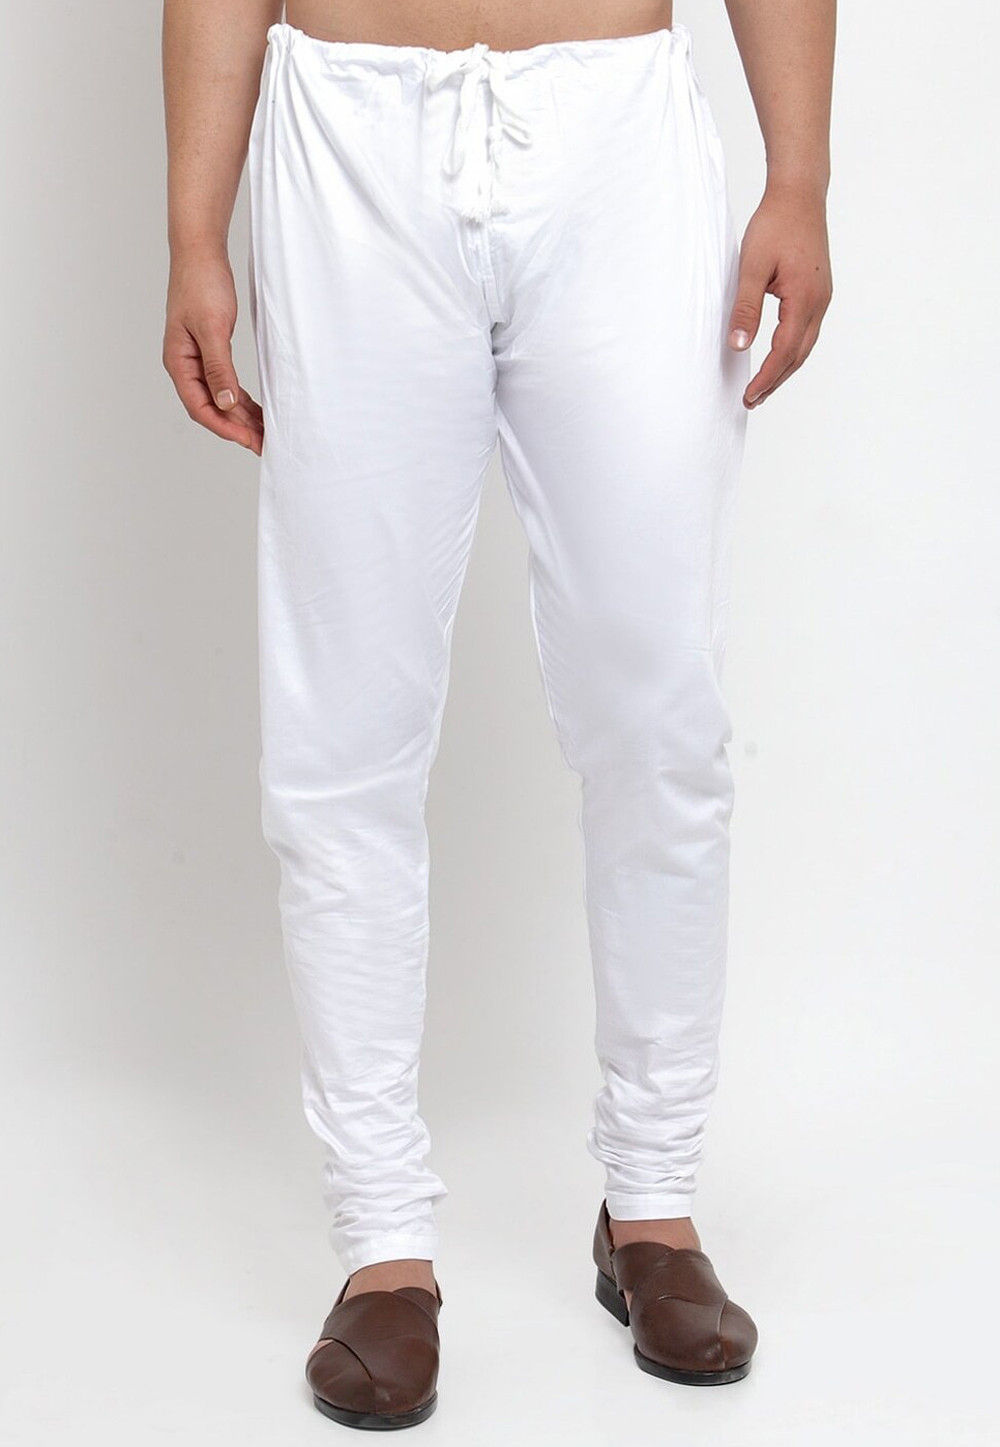 Solid Color Cotton Churidar in Off White : MSF826